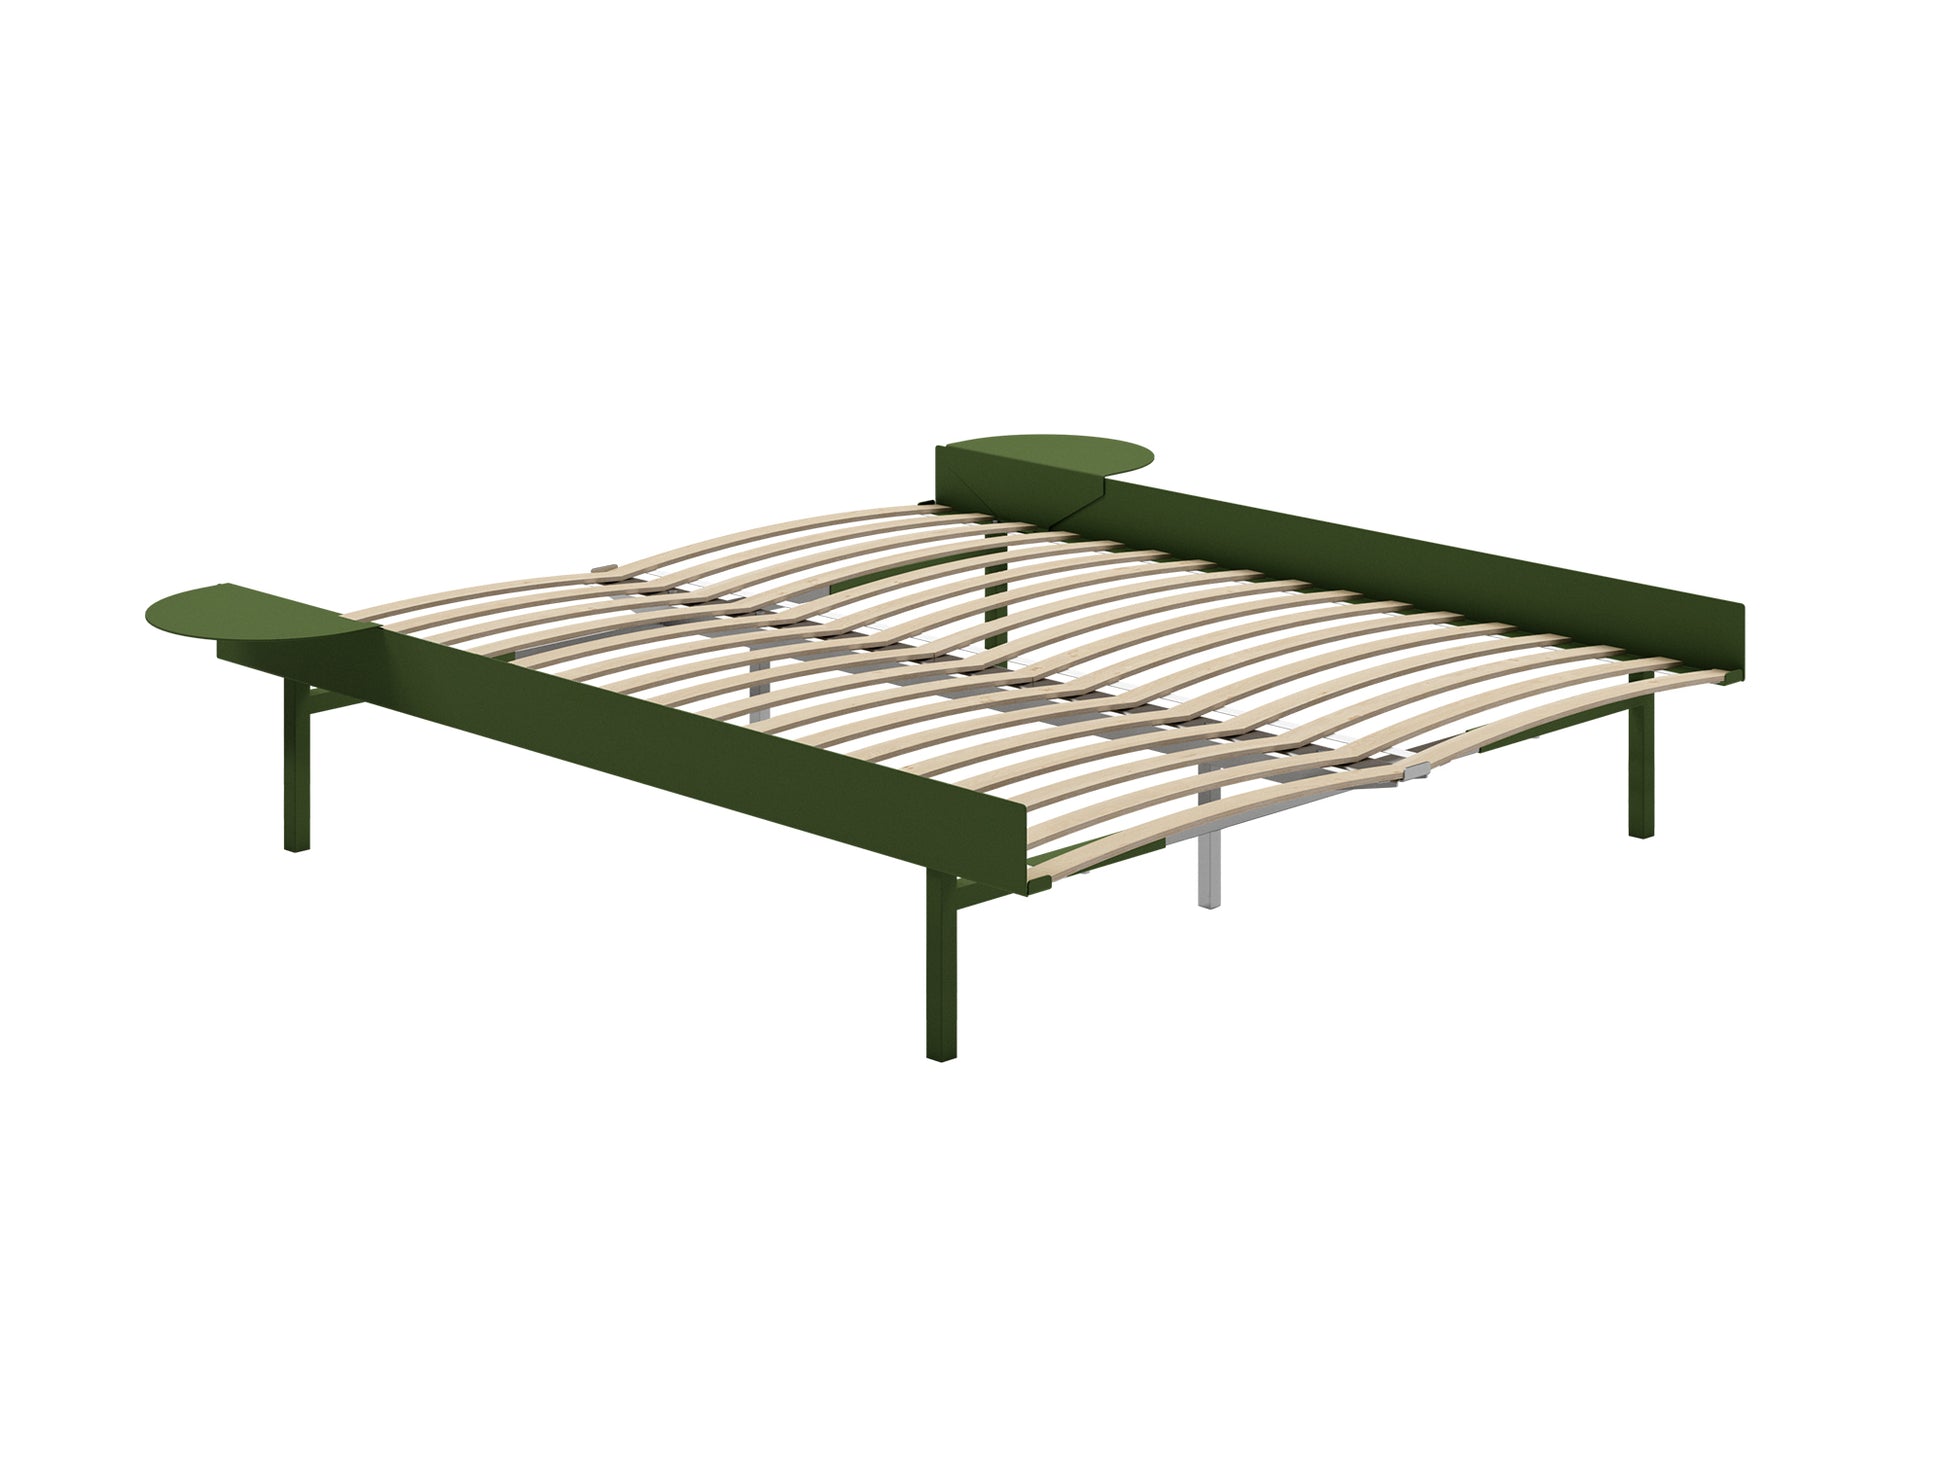 Bed 90 - 180 cm (High) by Moebe- Bed Frame / with 160cm wide Slats / 2 Side Table /  Pine Green